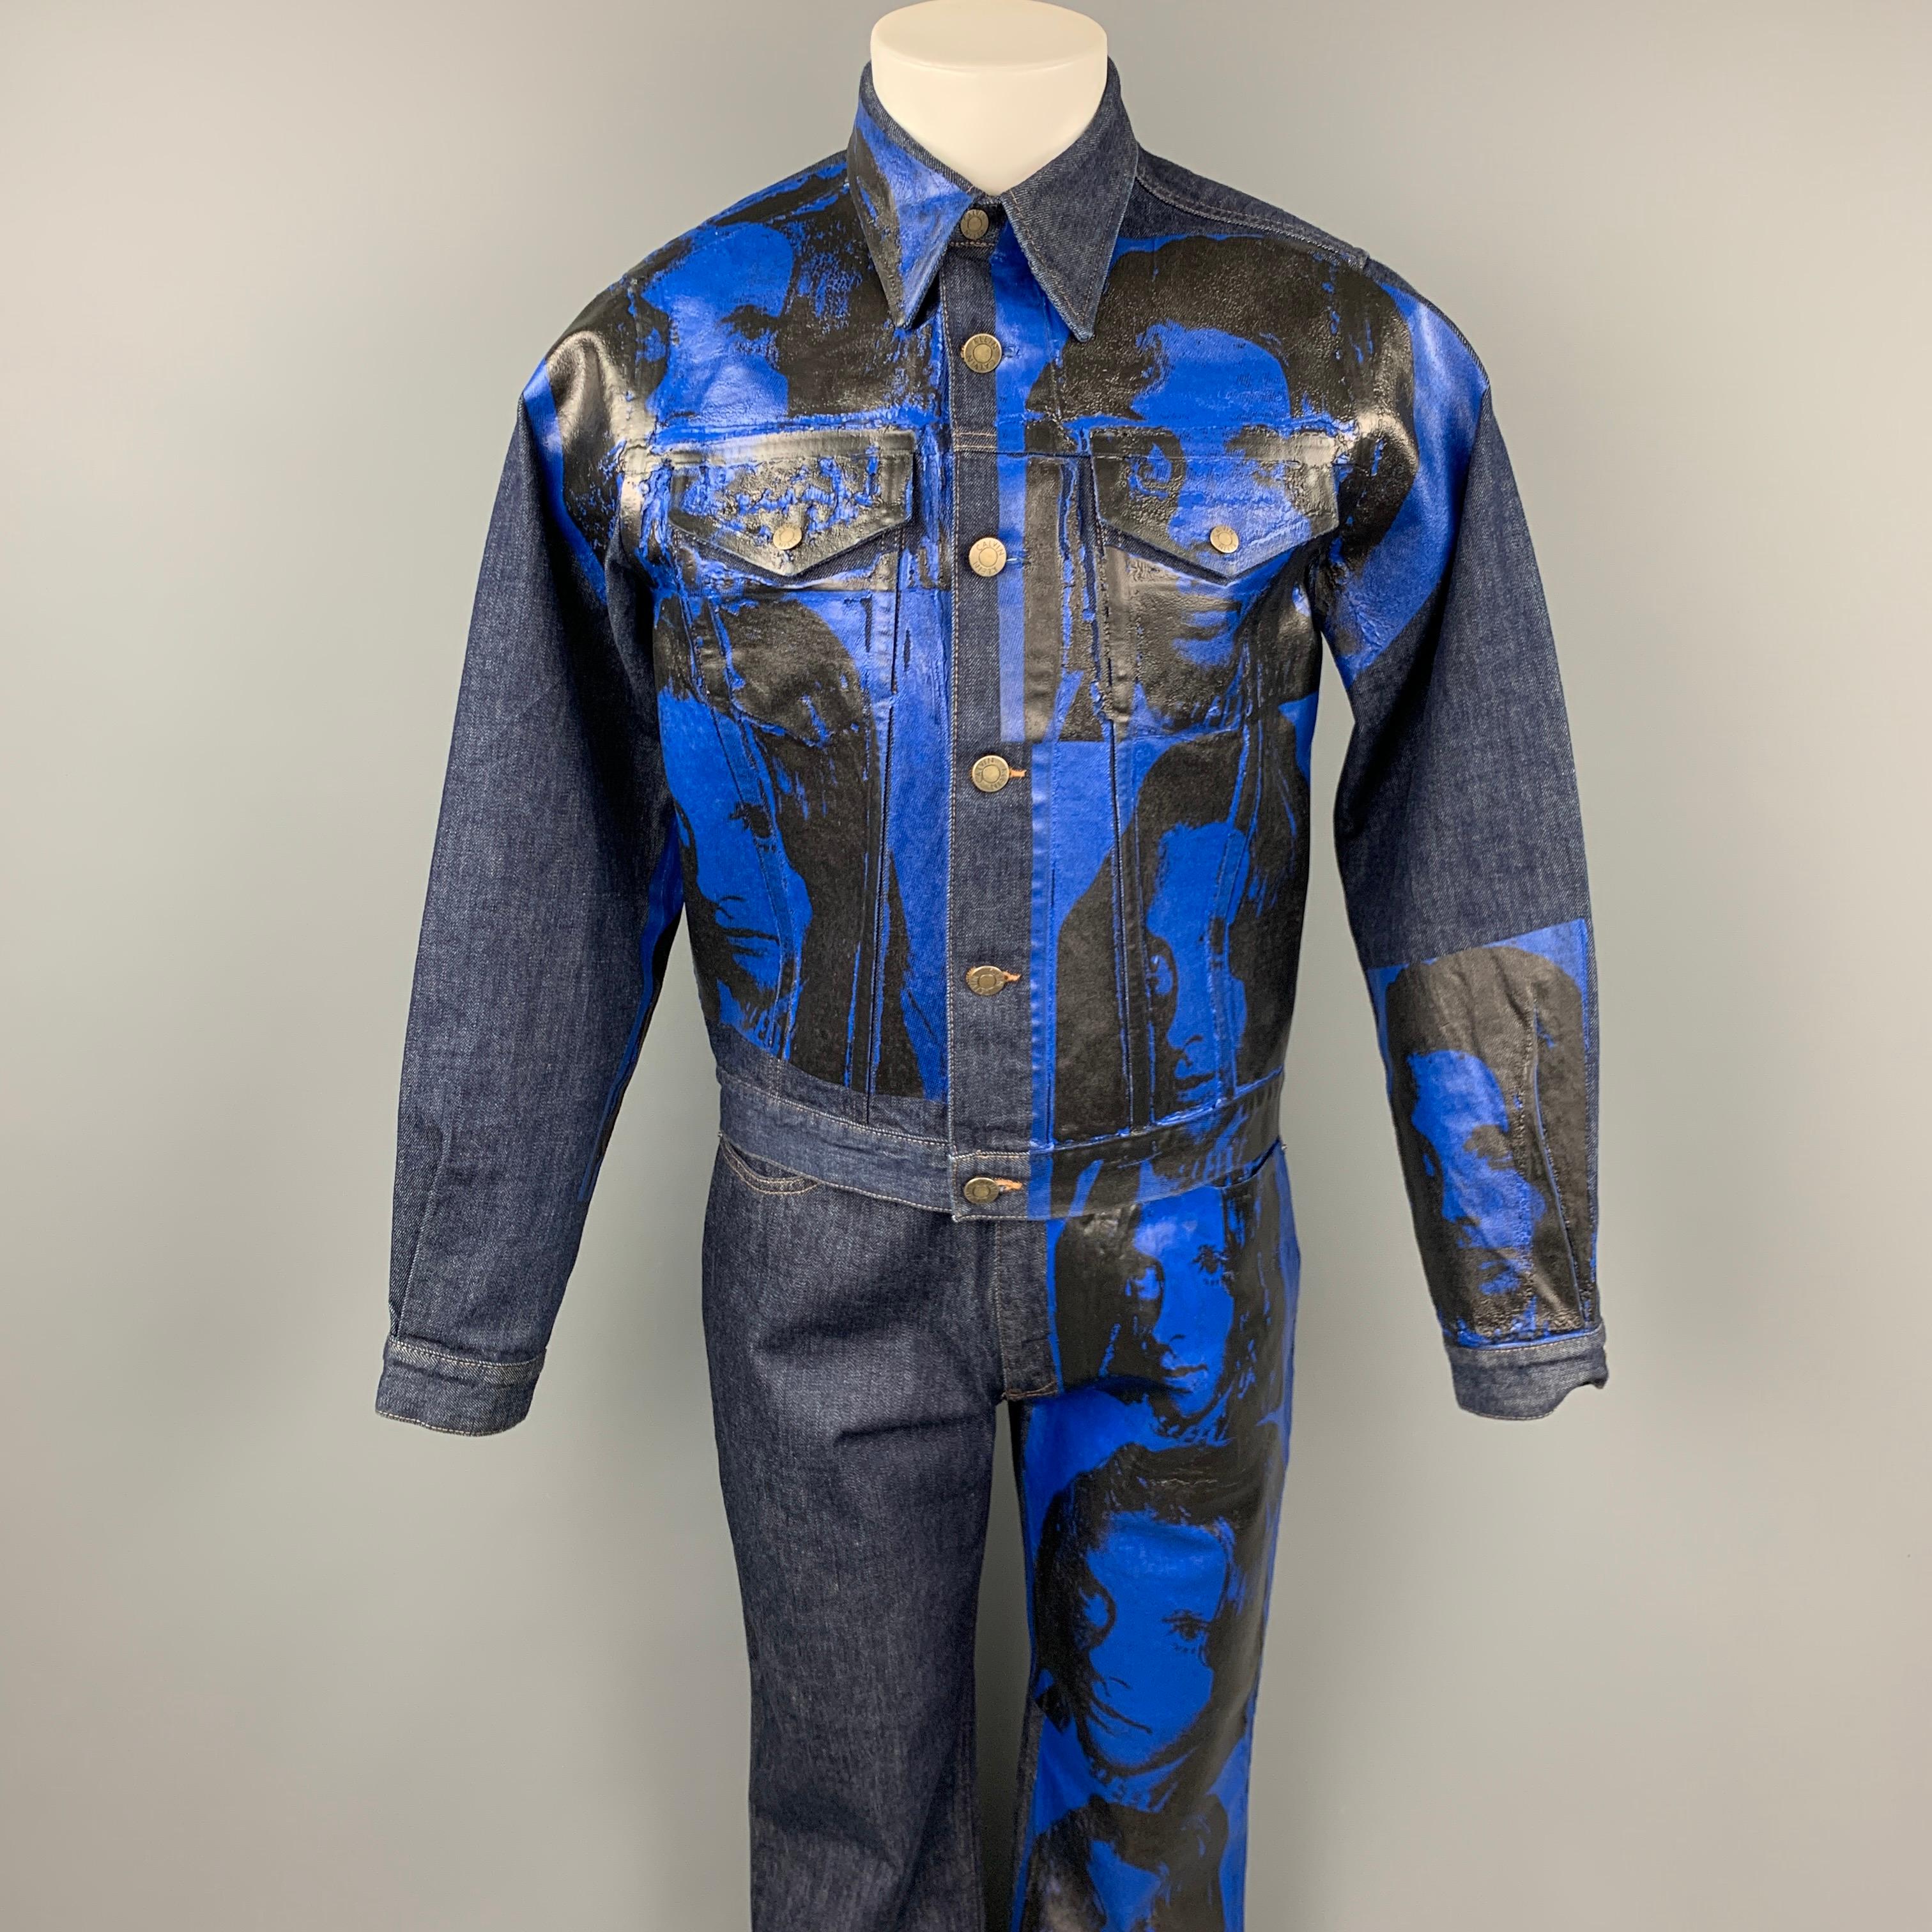 CALVIN KLEIN 205W39NYC by RAF SIMONS x Andy Warhol set comes in a indigo denim with a blue & black painted design of Sandra Brant in the 70's featuring contrast stitching, front pockets, tack buttons, and matching jeans. Made in Italy.

Very Good